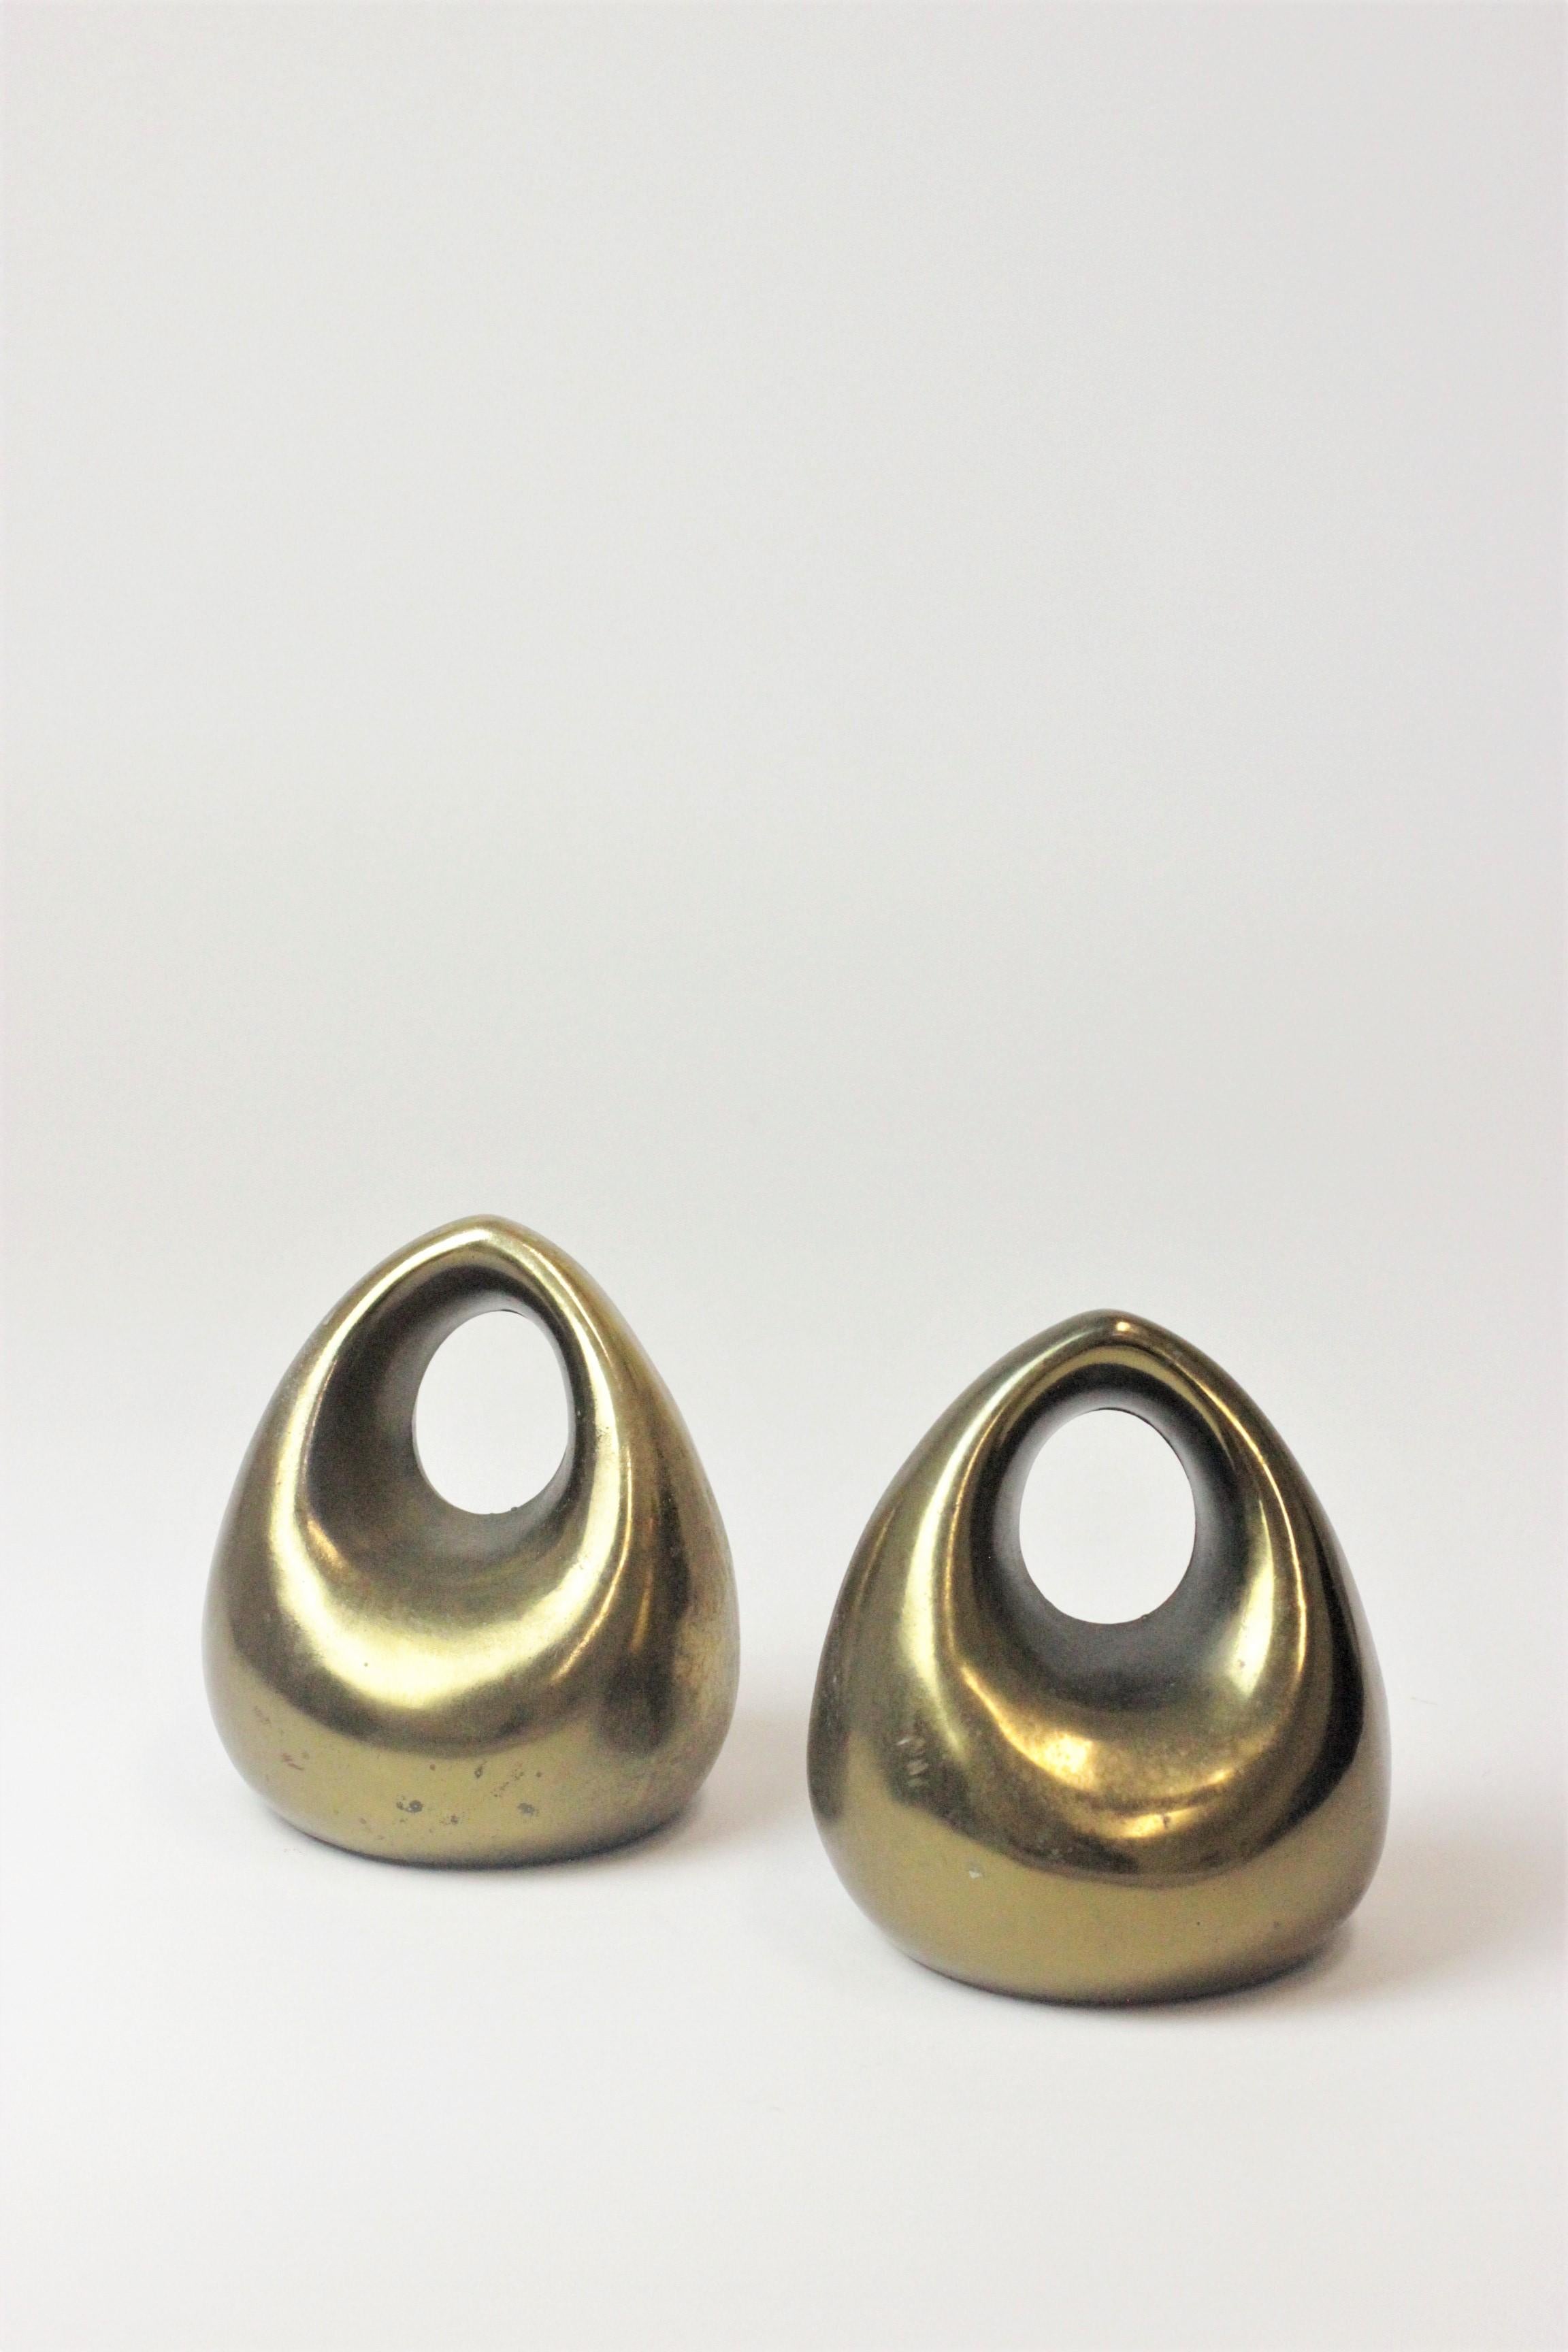 Ben Seibel for Jenfred-Ware Midcentury Gold Orb Bookends In Good Condition For Sale In Sheffield, GB